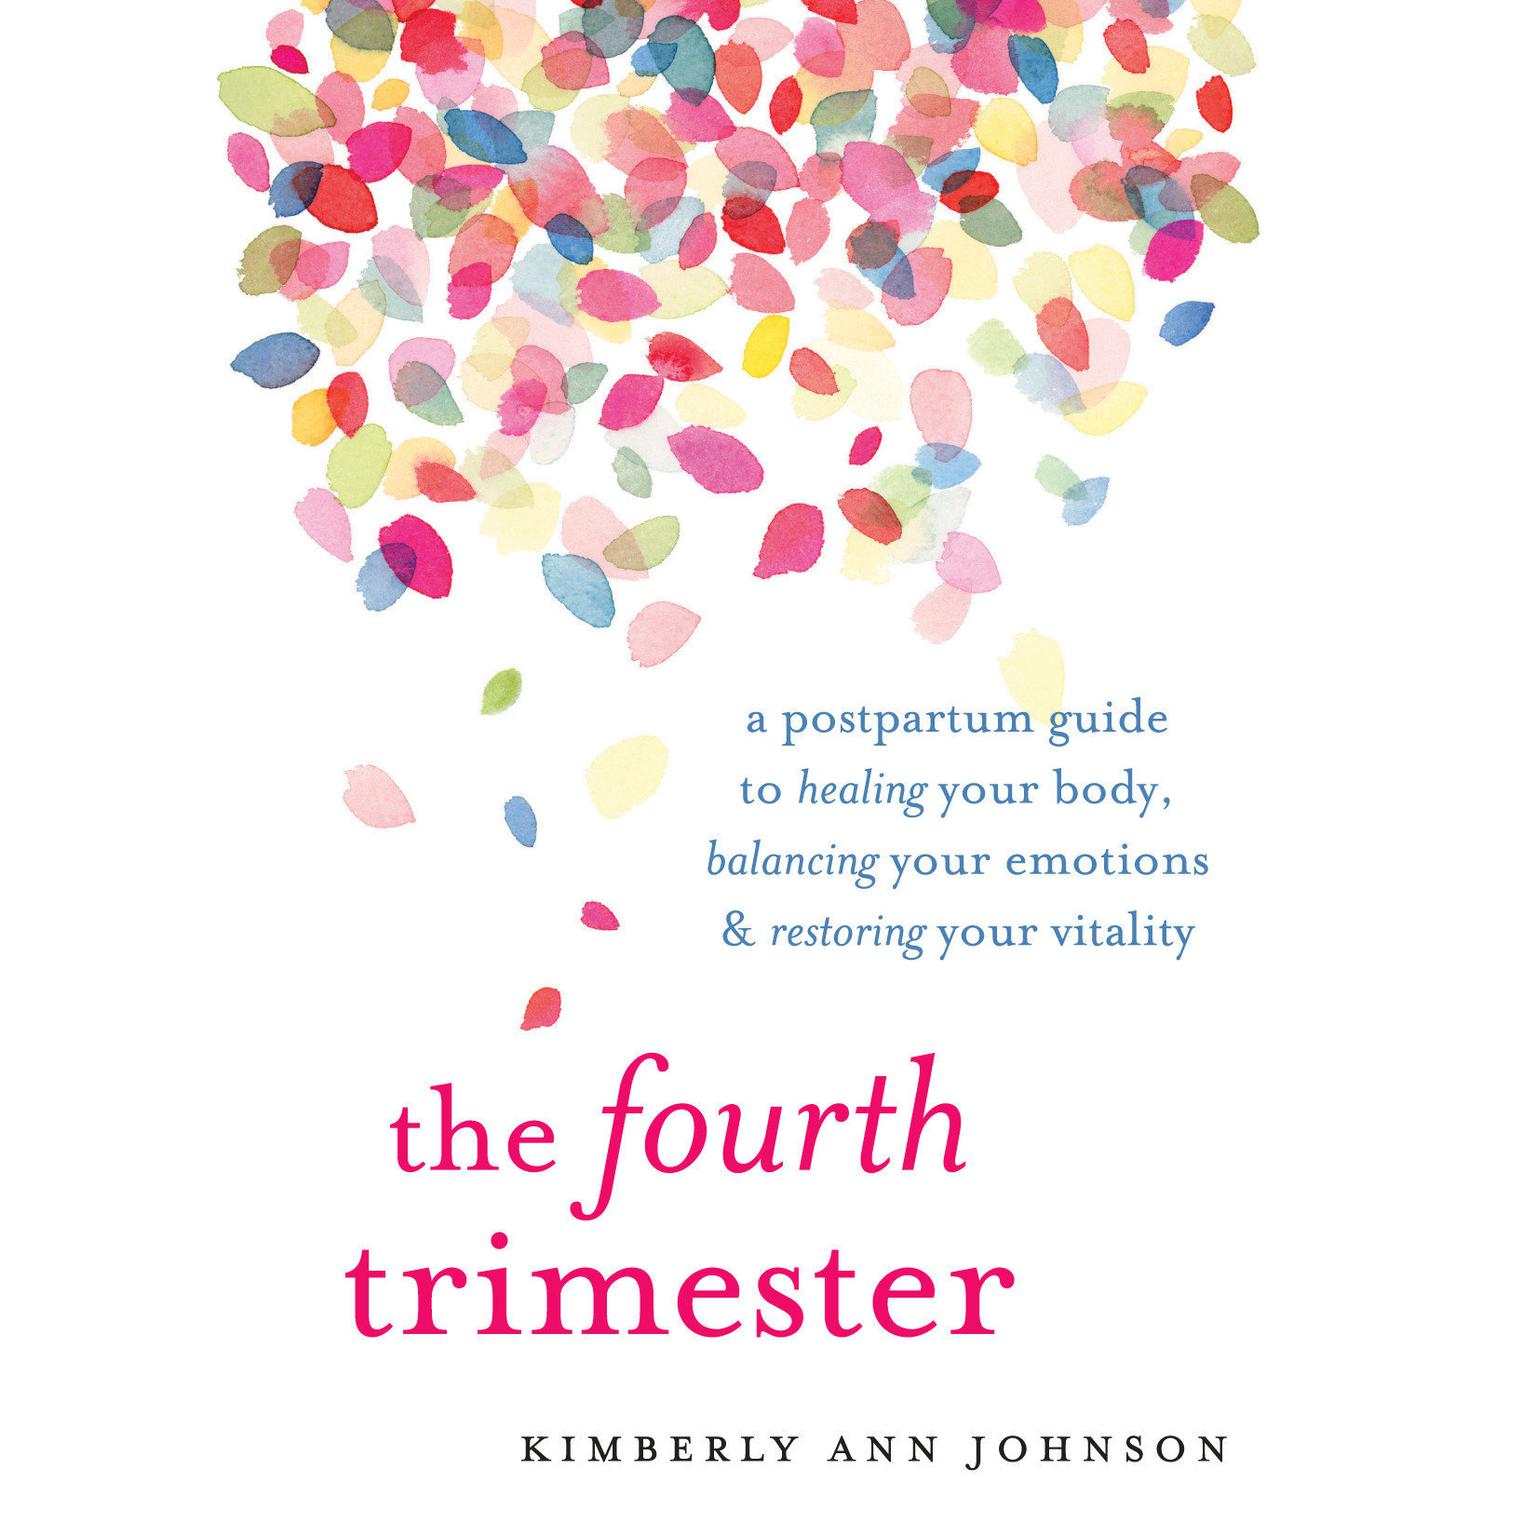 The Fourth Trimester: A Postpartum Guide to Healing Your Body, Balancing Your Emotions, and Restoring Your Vitality Audiobook, by Kimberly Ann Johnson